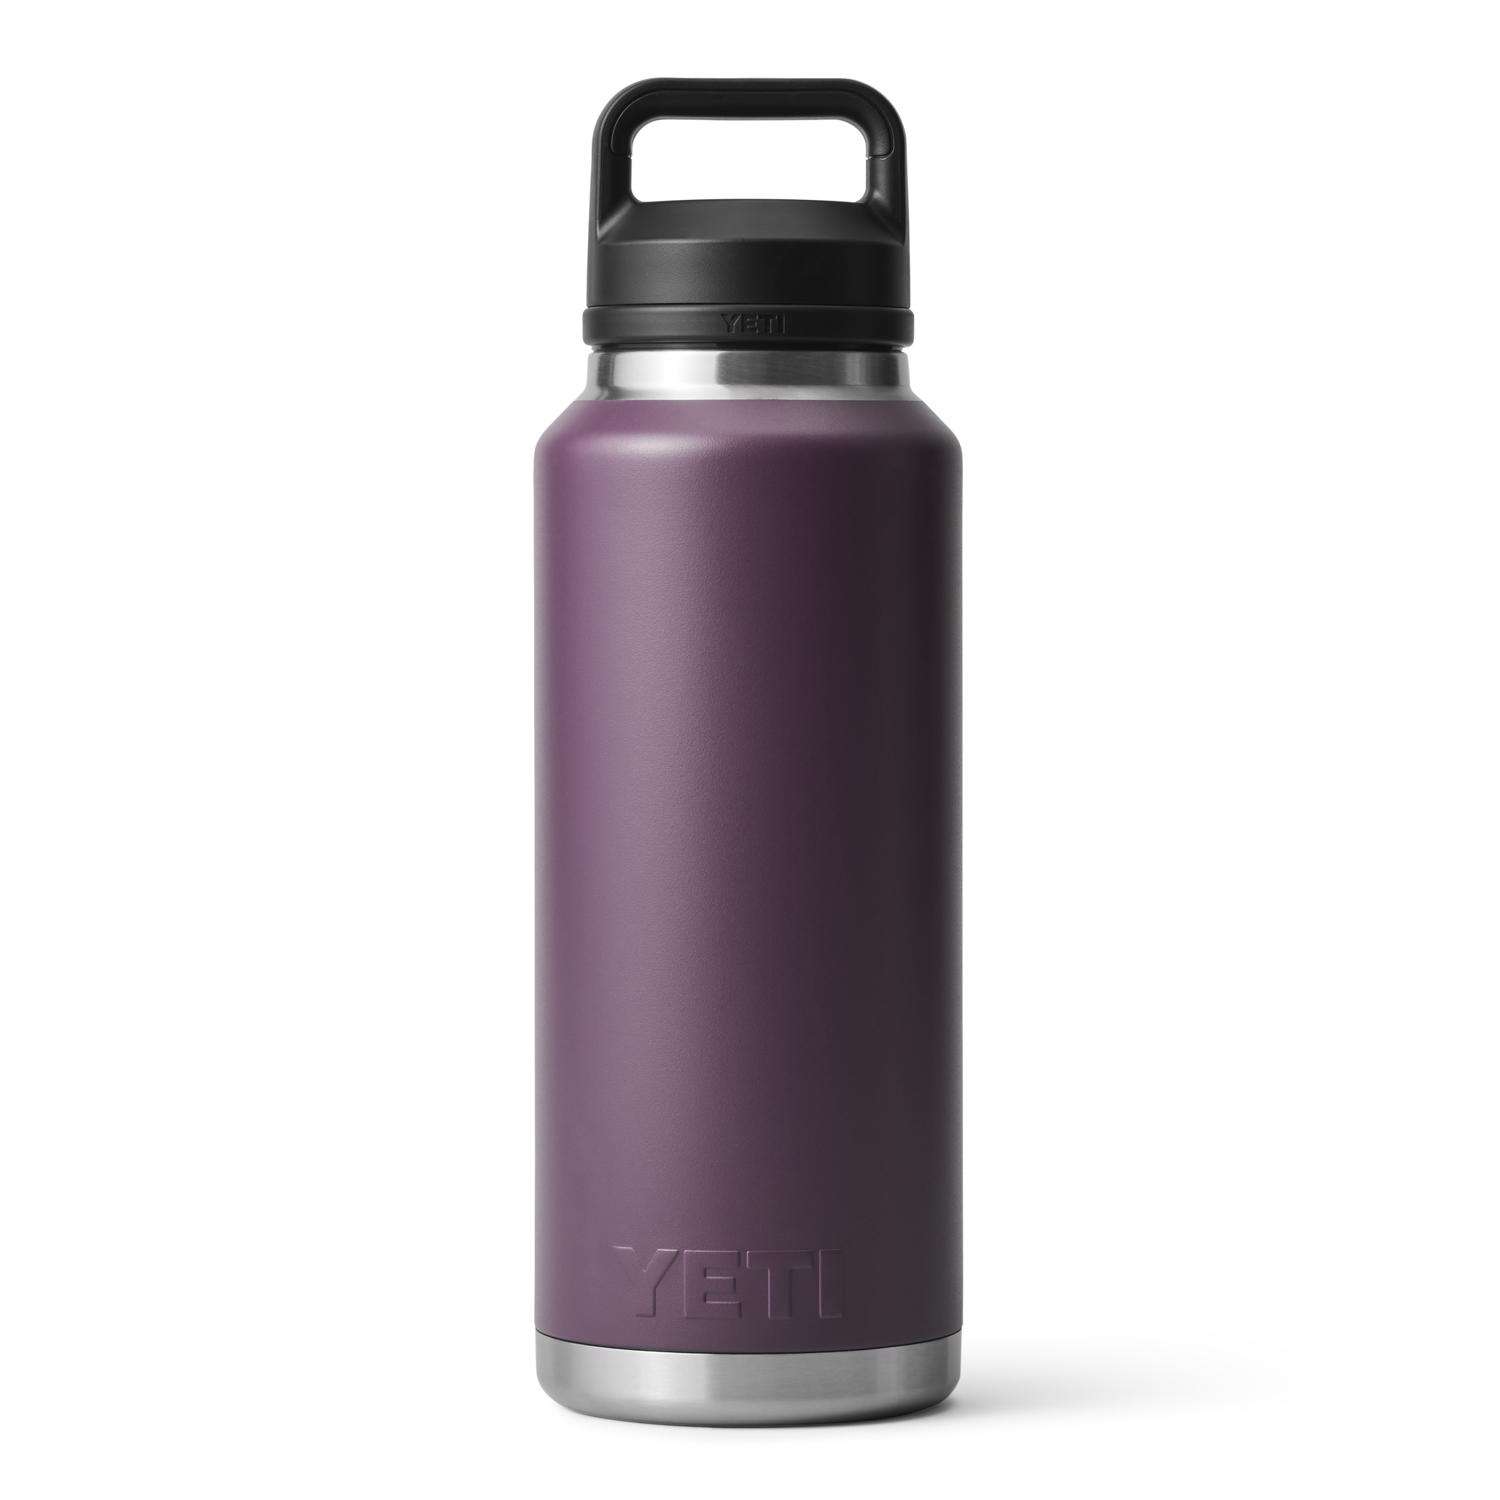 Portable Outdoor Direct Drinking Filter Water Bottle (smoky Purple)